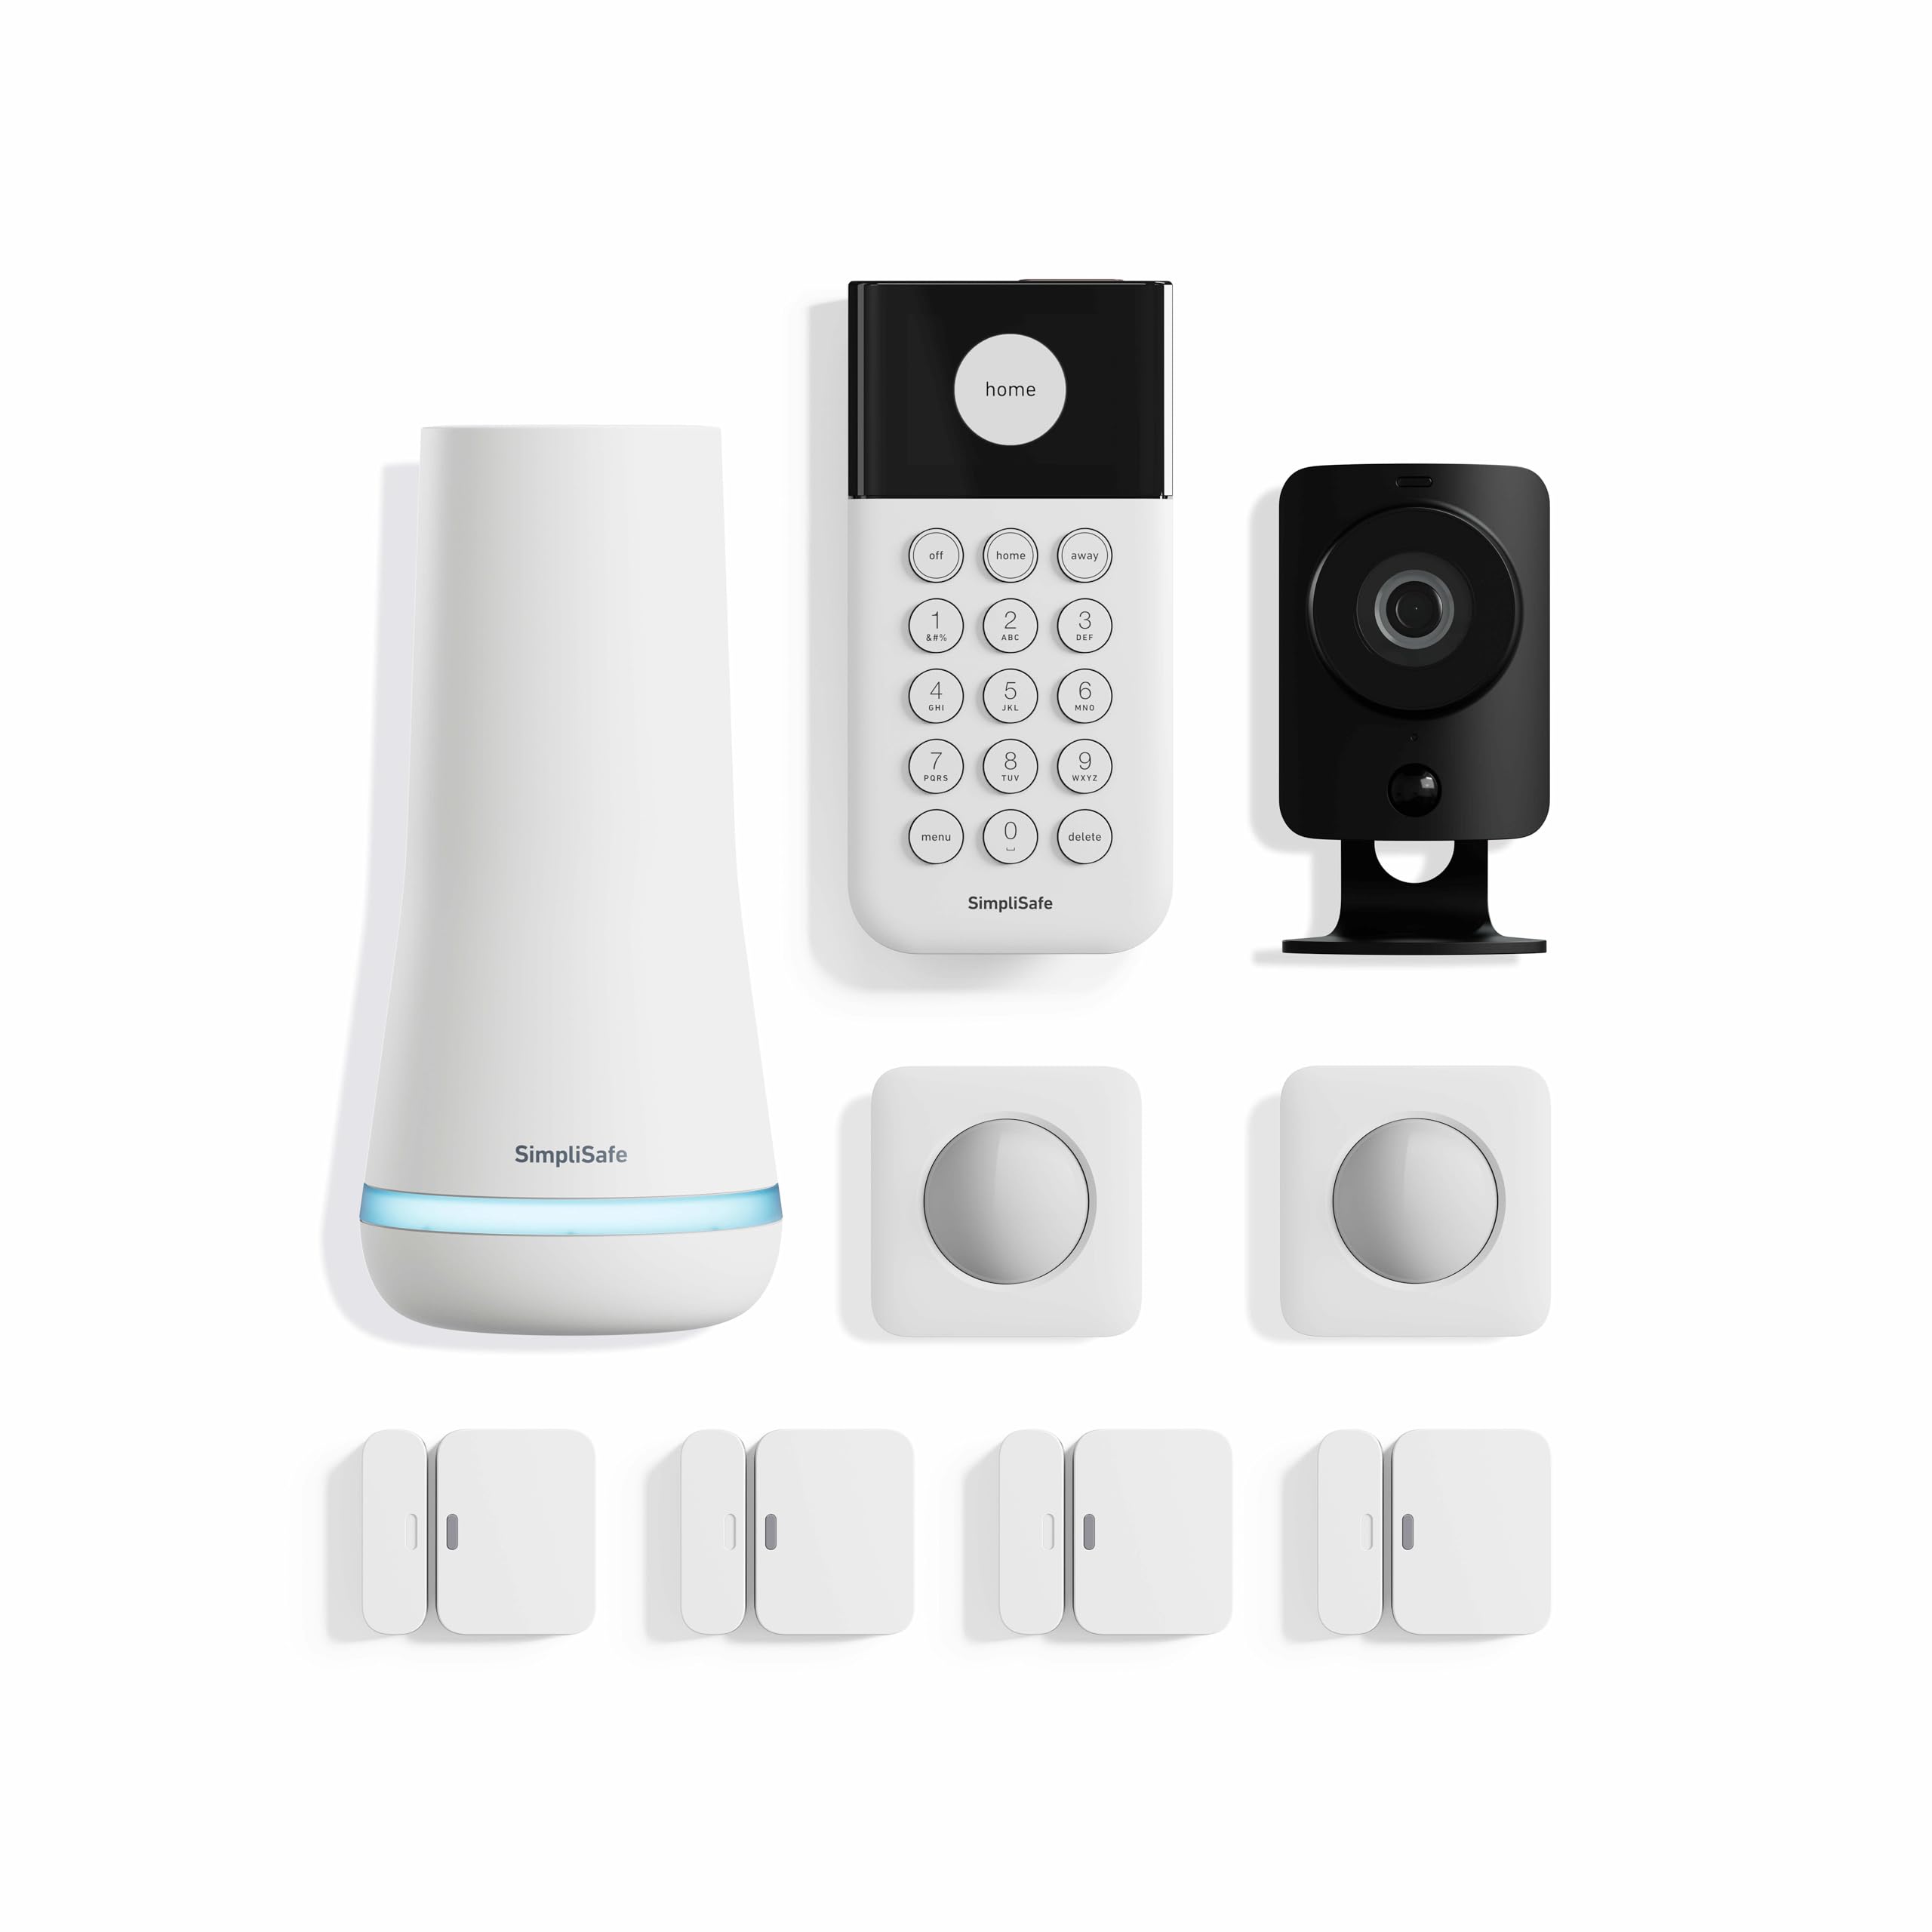 Will Simplicam Only Record With the Alarm System Activated